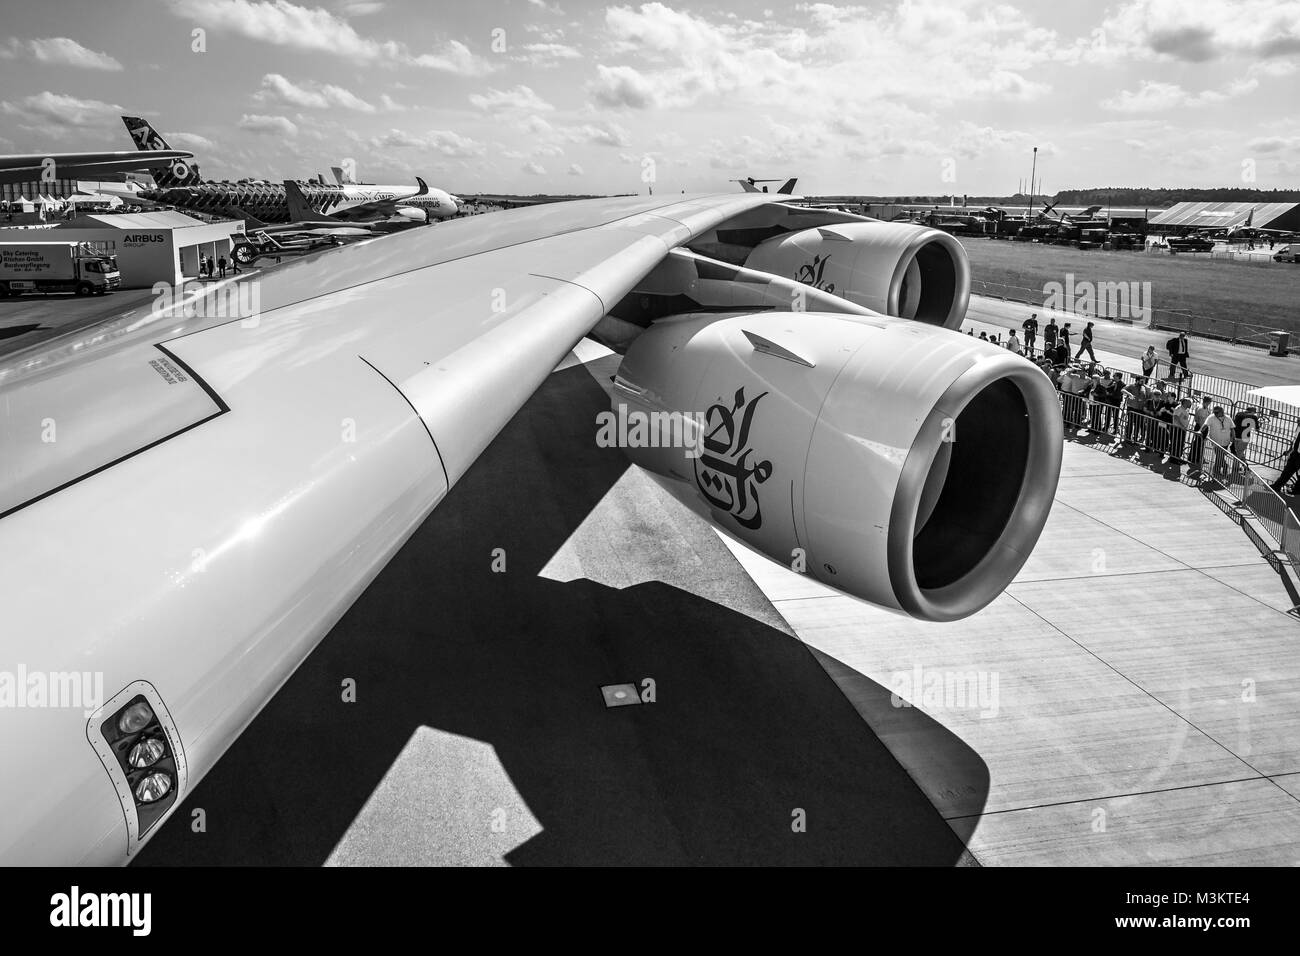 BERLIN, GERMANY - JUNE 01, 2016: Detail of the wing and a turbofan engine 'Engine Alliance GP7000' of the largest aircraft in the world - Airbus A380. Emirates Airline. Black and white. Exhibition ILA Berlin Air Show 2016 Stock Photo